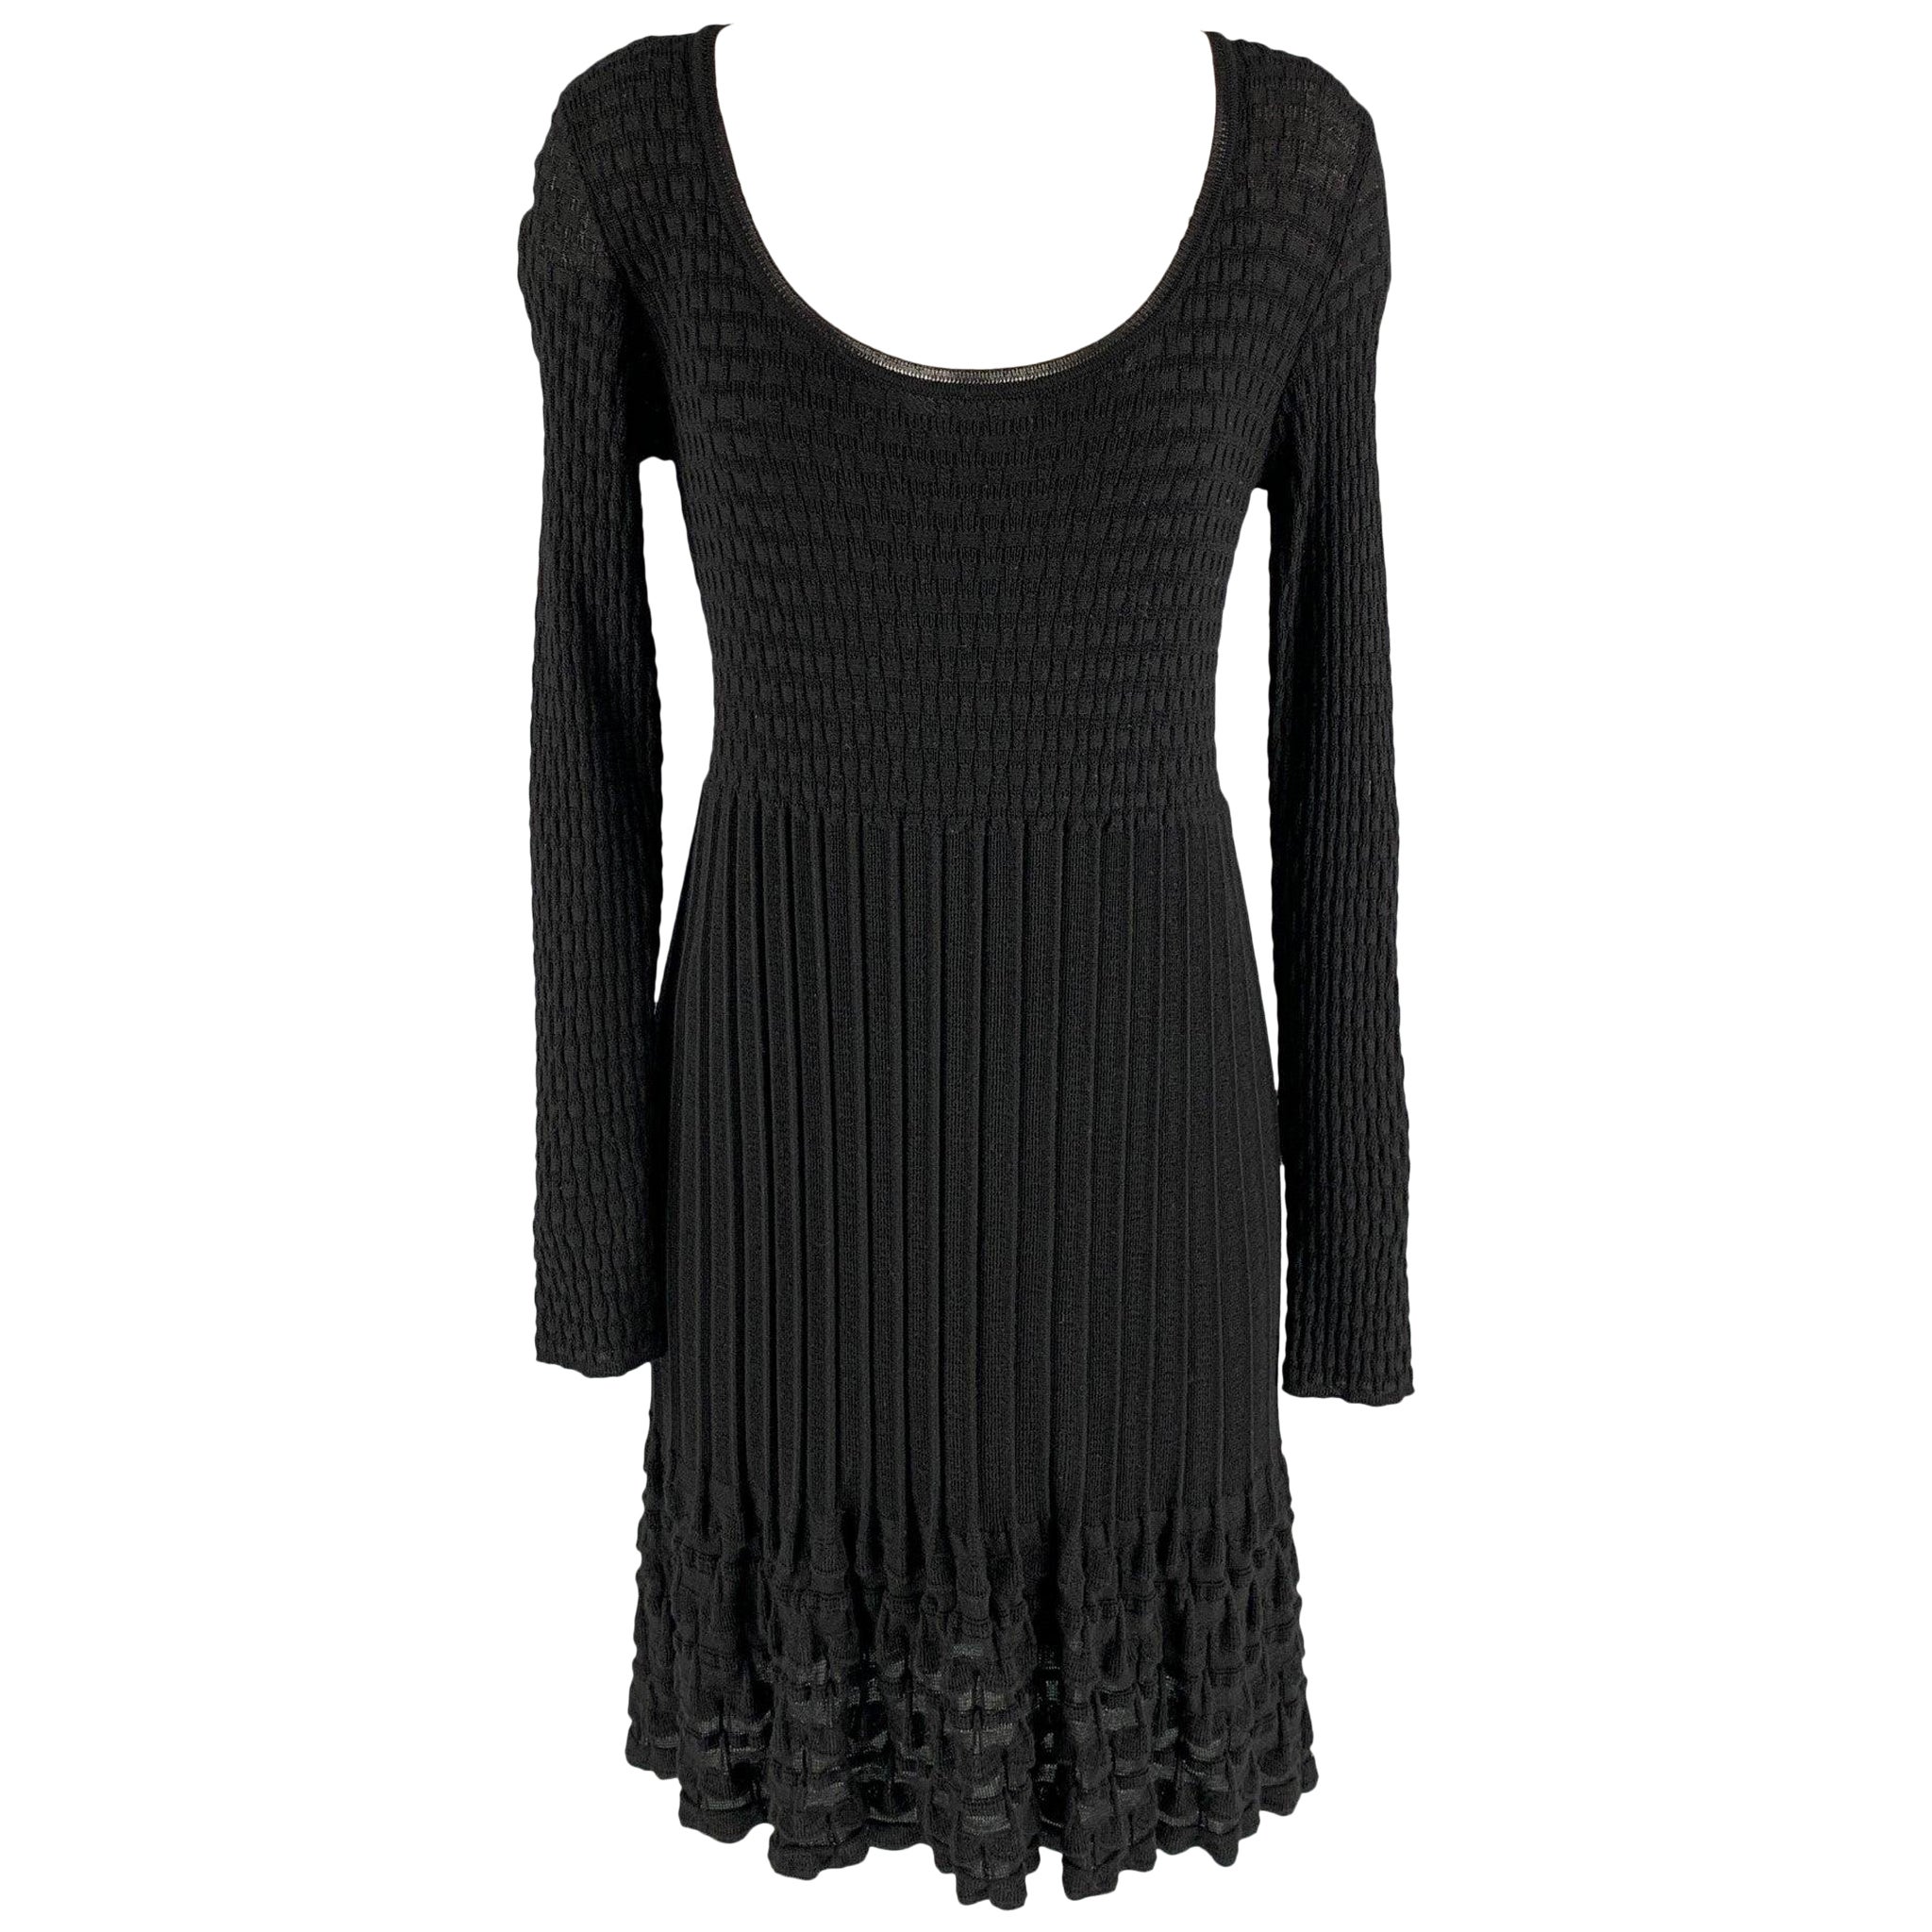 M MISSONI Size 8 Black Wool Blend Knitted A-Line Dress For Sale